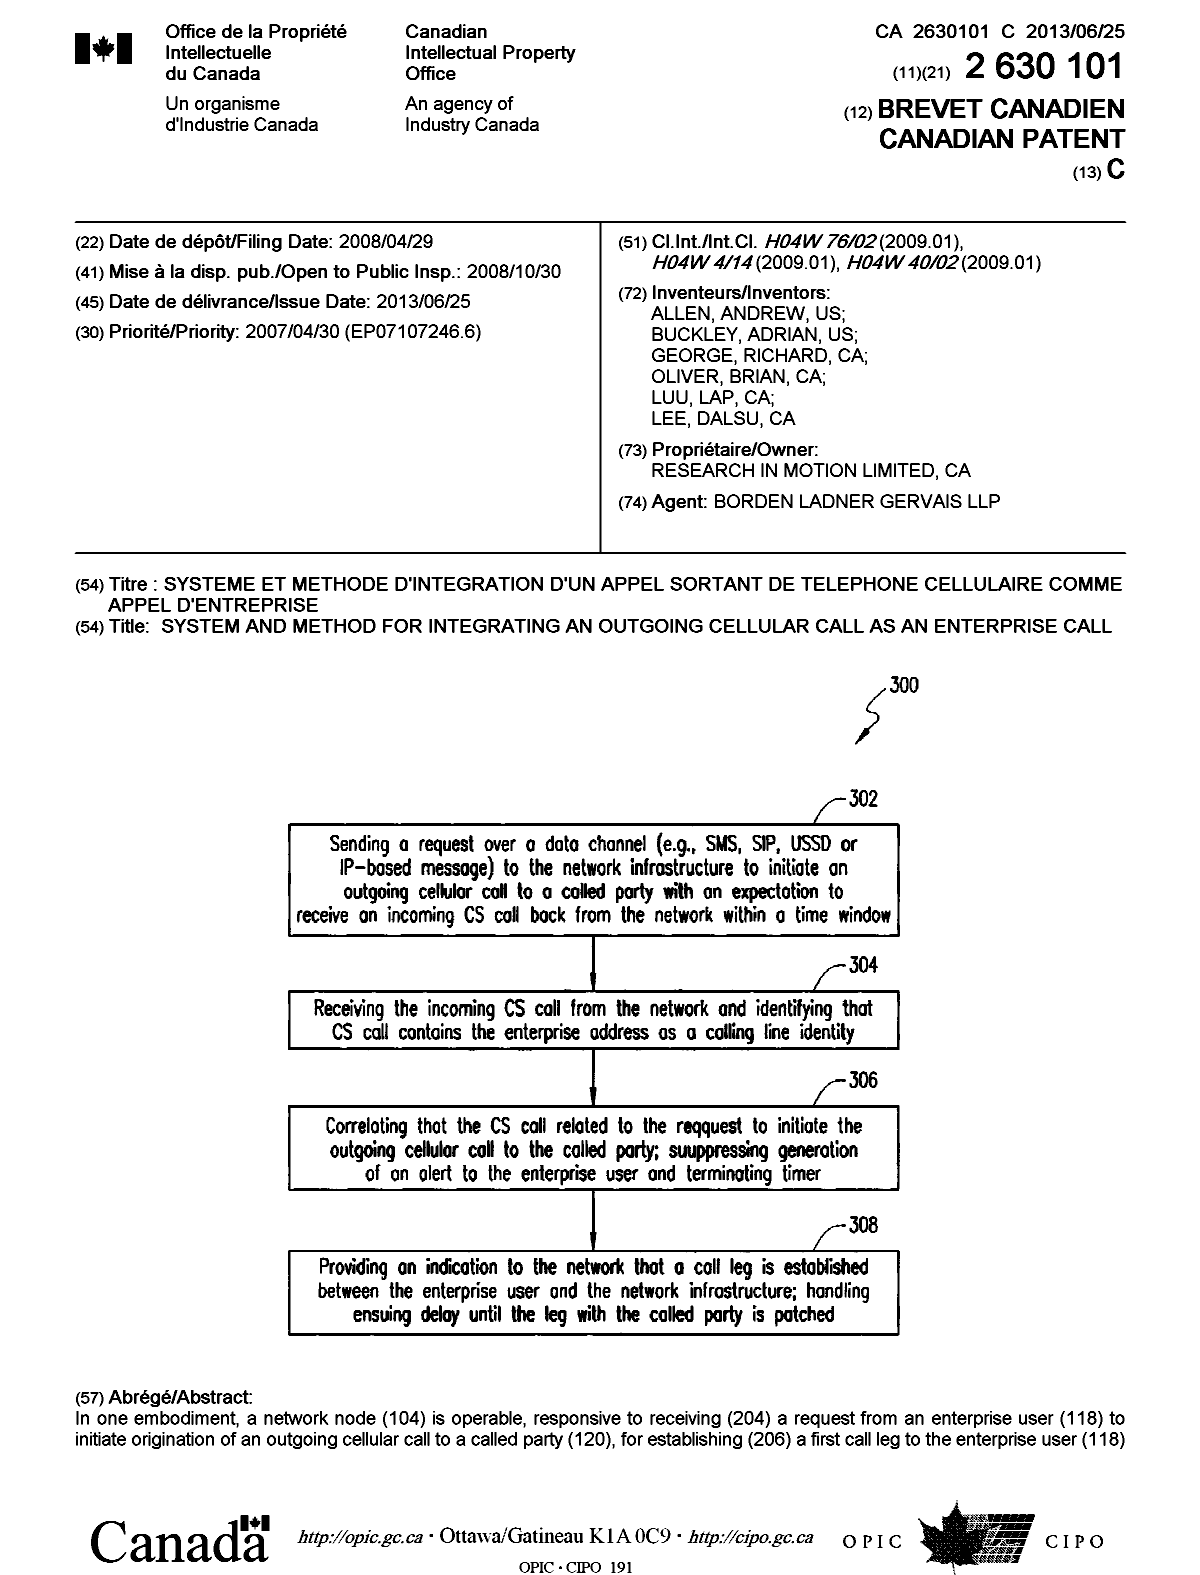 Canadian Patent Document 2630101. Cover Page 20130605. Image 1 of 2